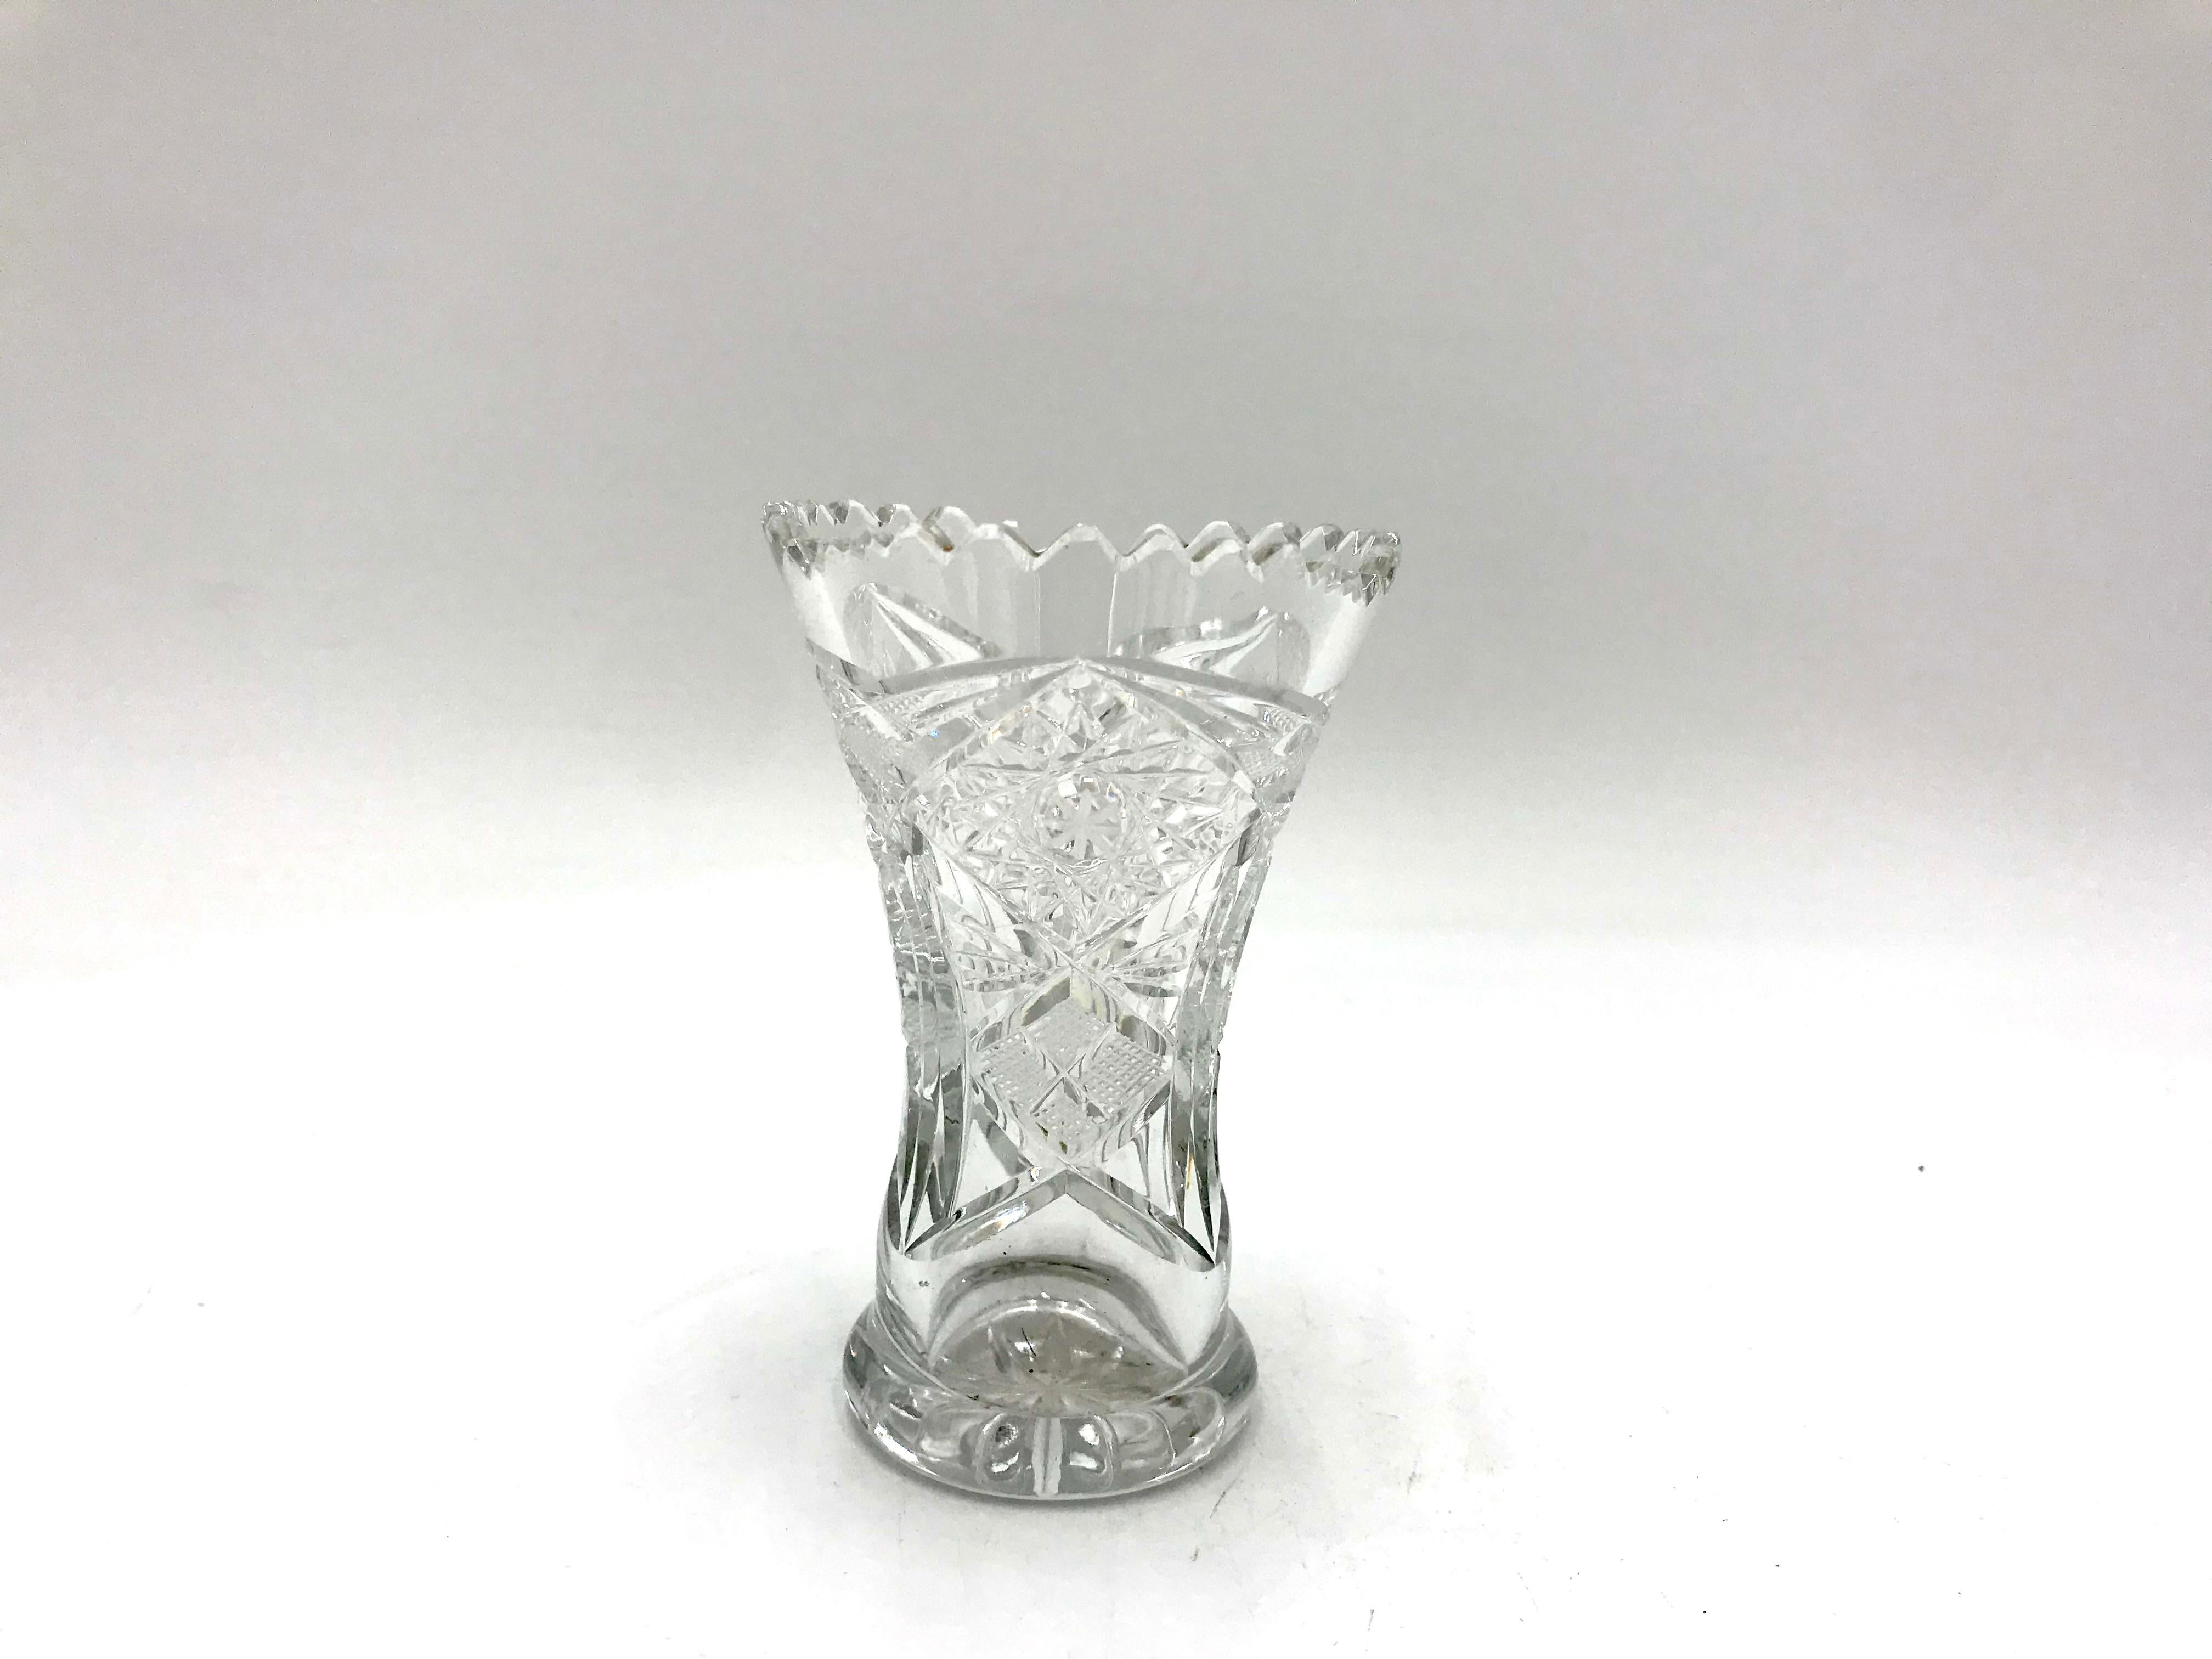 Vase made of crystal. 
The vase was produced in Poland in the 1960s and 1970s.
Vase in very good condition
Measures: Height 10cm / diameter 7cm.